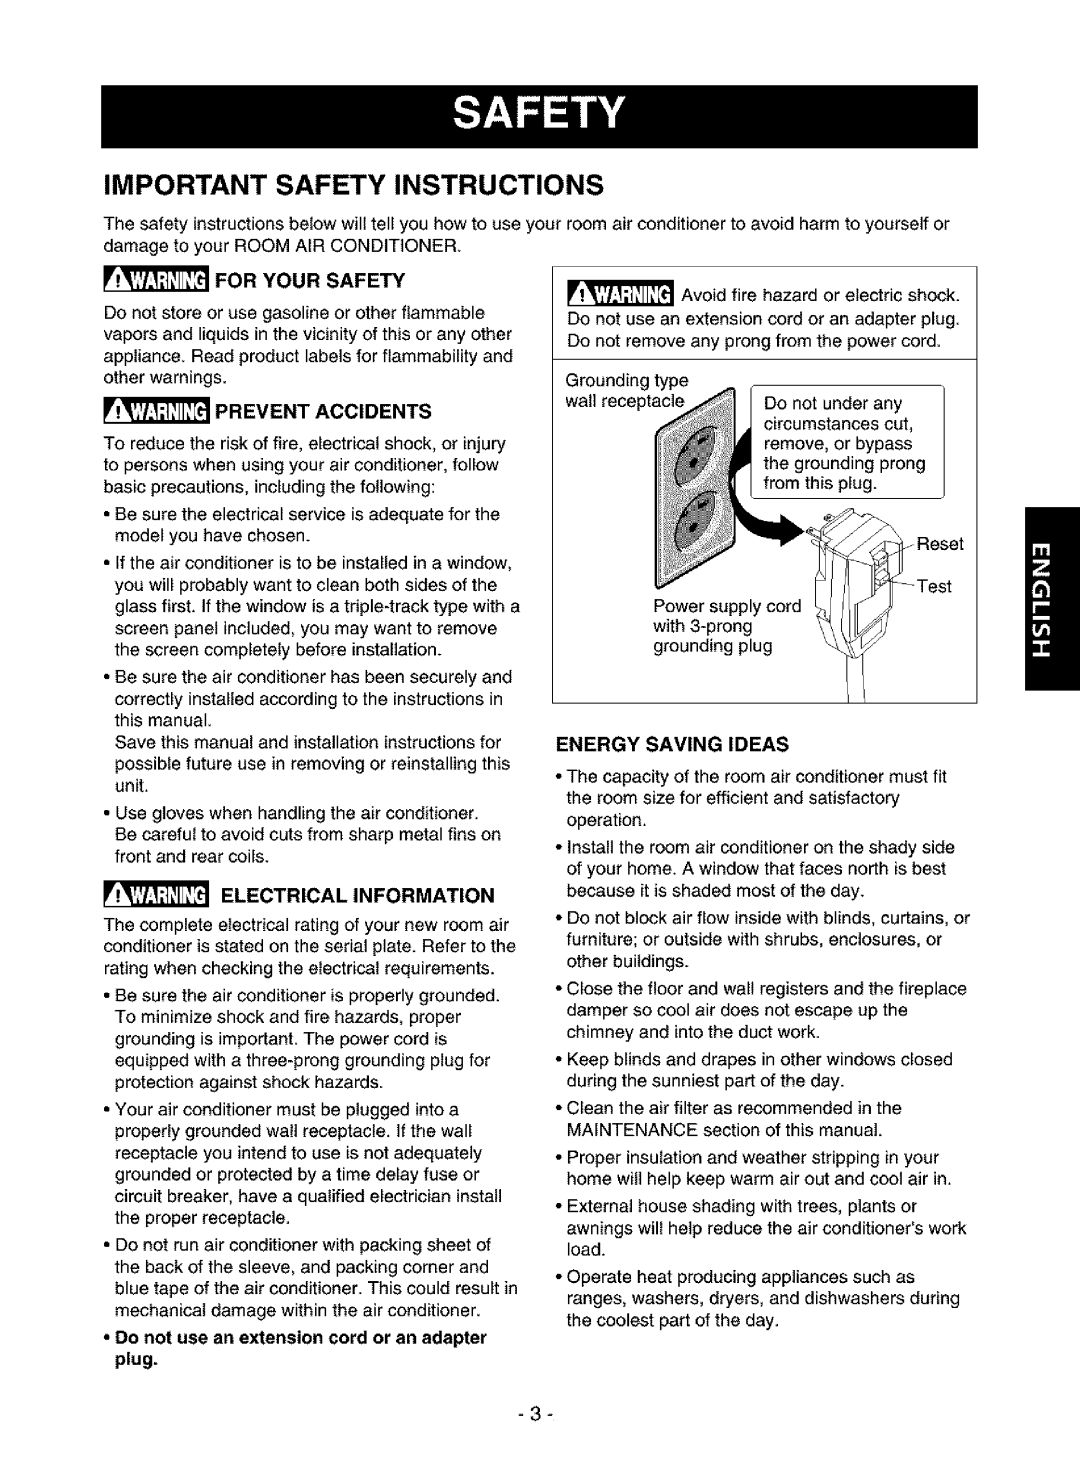 Kenmore 580.75135 Important Safety Instructions, damage to your ROOM AIR CONDITIONER, For Your Safety, Energy Saving Ideas 